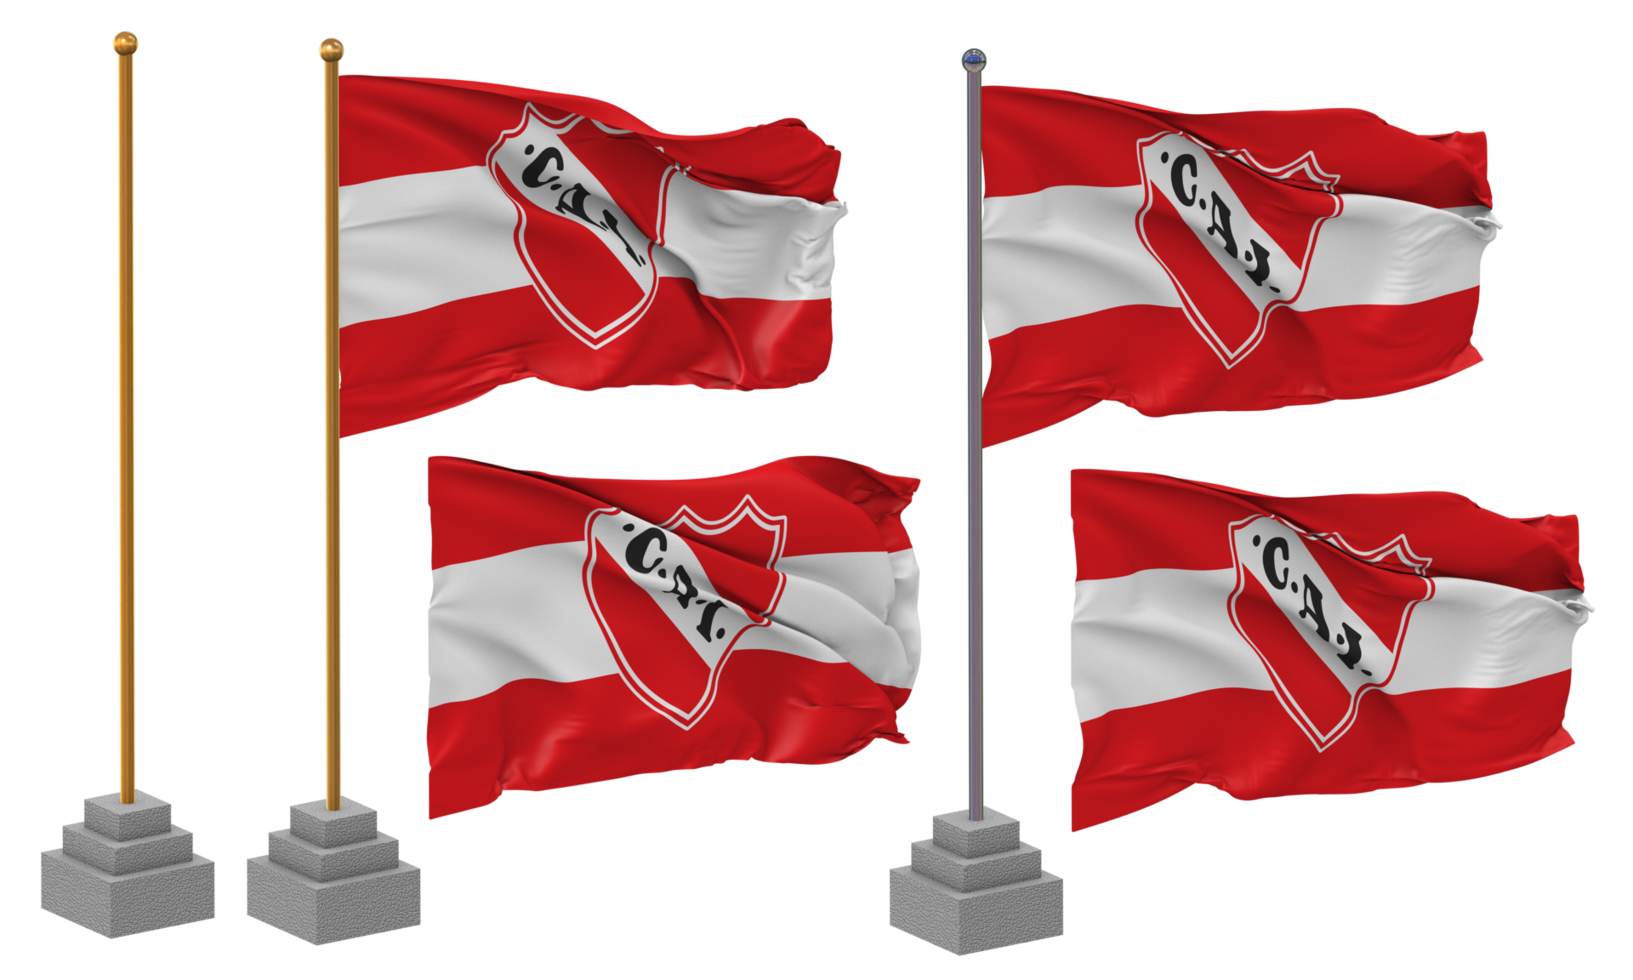 Club Atletico Independiente Pinned Flag from Corners, Isolated with  Different Waving Variations, 3D Rendering 24798009 PNG